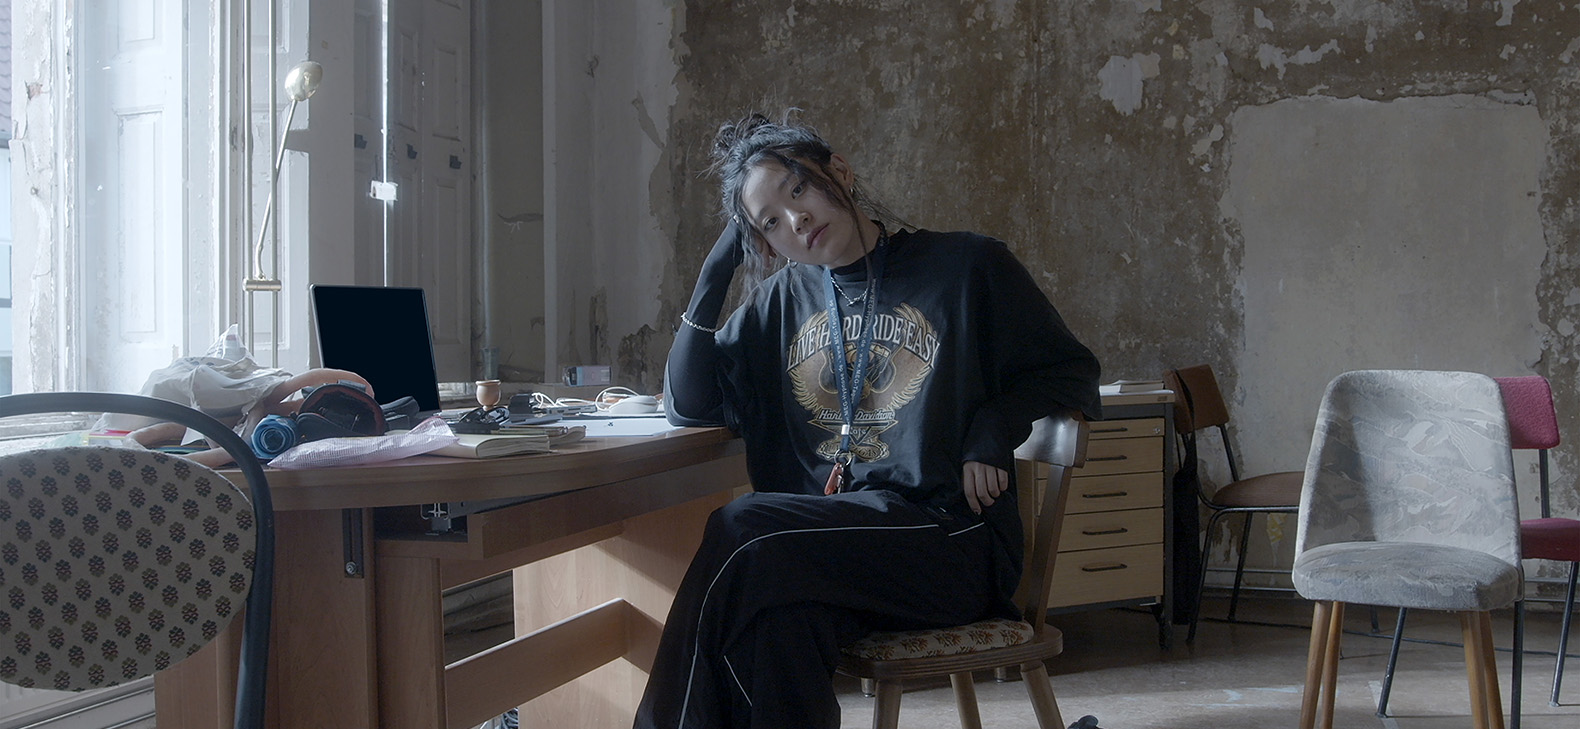 Artist-in-Residence: Eunju Hong, Focus > Kosice, stay in Kosice in autumn 2023: Image: portrait of the artist sitting at a desk.